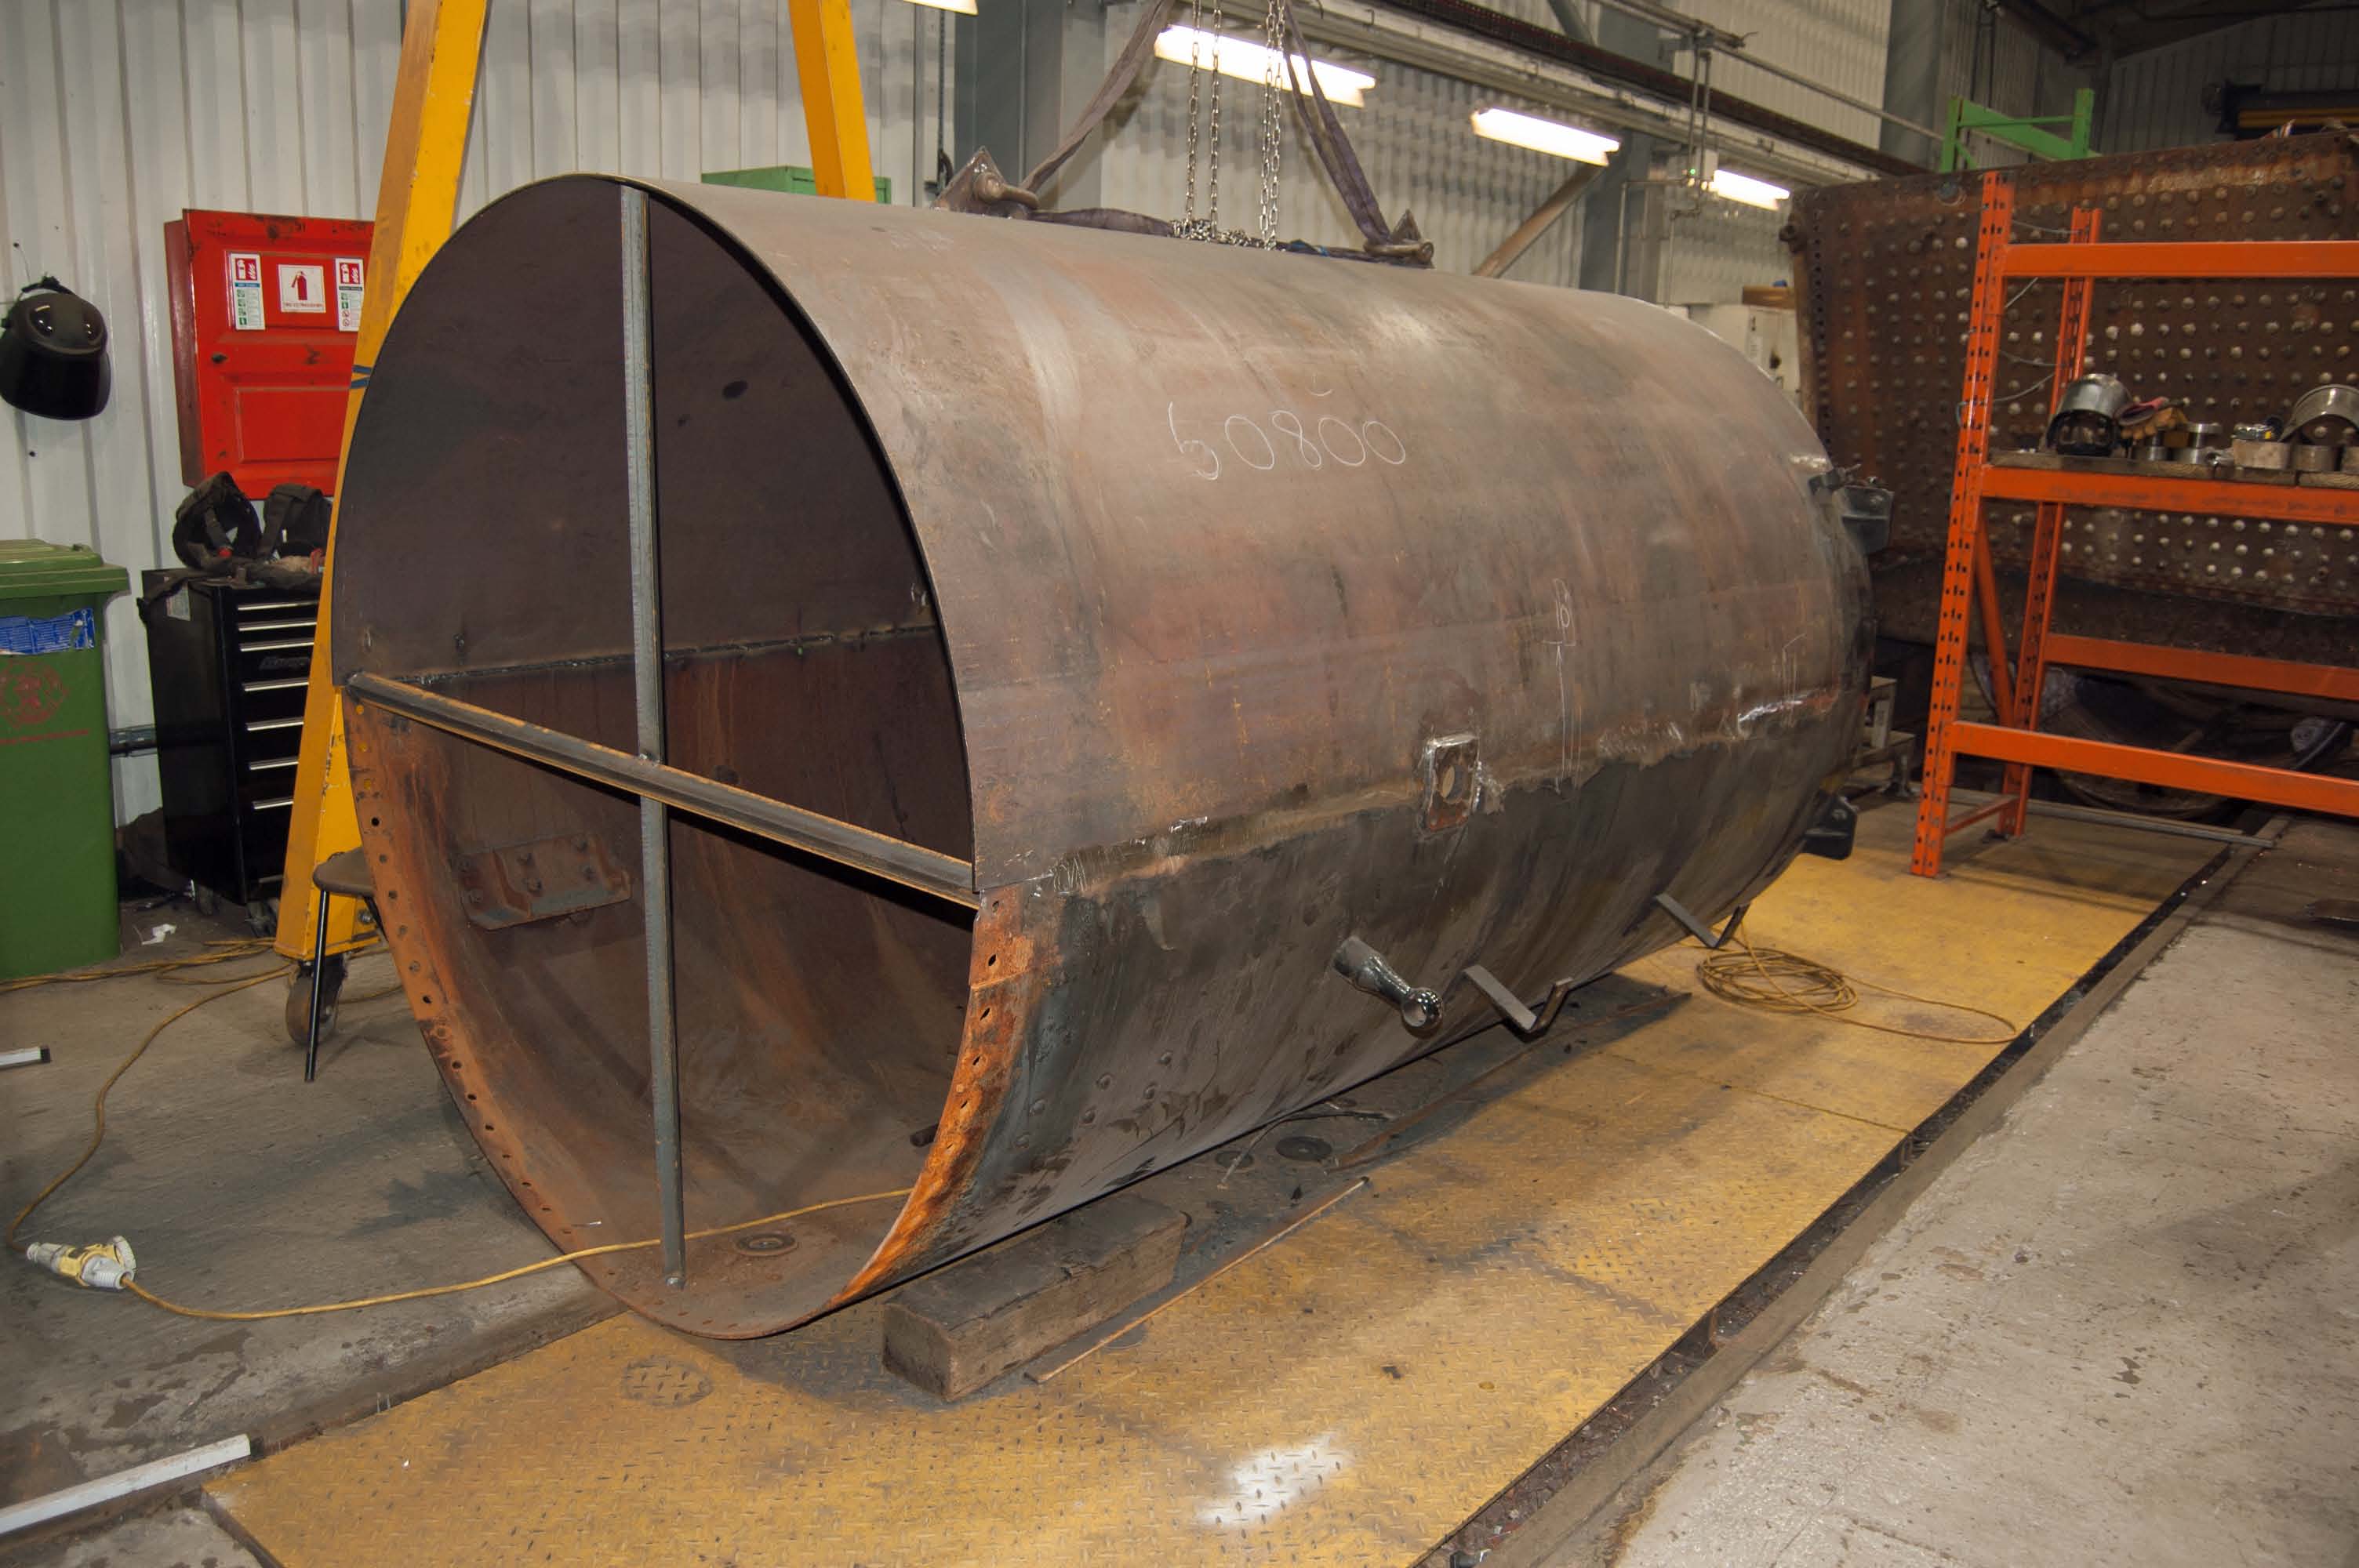 The new bottom half of the smokebox is in the process of being welded to the top half (it is upside down).